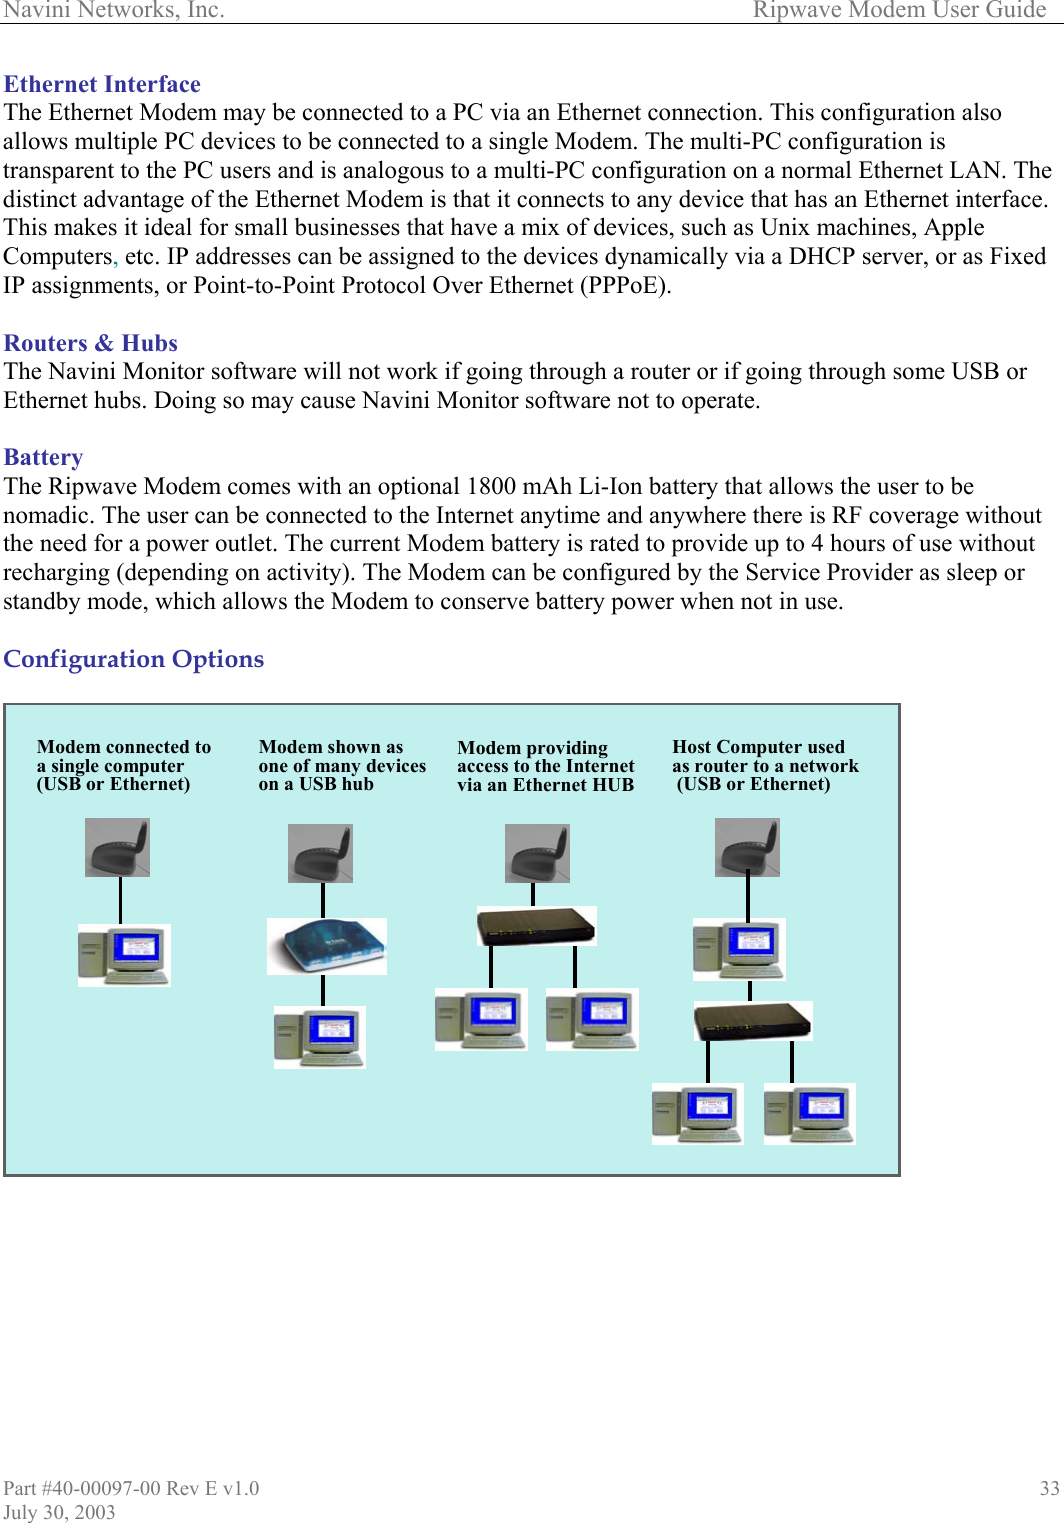 Navini Networks, Inc.        Ripwave Modem User Guide Part #40-00097-00 Rev E v1.0 July 30, 2003 33Ethernet Interface The Ethernet Modem may be connected to a PC via an Ethernet connection. This configuration also allows multiple PC devices to be connected to a single Modem. The multi-PC configuration is transparent to the PC users and is analogous to a multi-PC configuration on a normal Ethernet LAN. The distinct advantage of the Ethernet Modem is that it connects to any device that has an Ethernet interface. This makes it ideal for small businesses that have a mix of devices, such as Unix machines, Apple Computers, etc. IP addresses can be assigned to the devices dynamically via a DHCP server, or as Fixed IP assignments, or Point-to-Point Protocol Over Ethernet (PPPoE).  Routers &amp; Hubs The Navini Monitor software will not work if going through a router or if going through some USB or Ethernet hubs. Doing so may cause Navini Monitor software not to operate.   Battery The Ripwave Modem comes with an optional 1800 mAh Li-Ion battery that allows the user to be nomadic. The user can be connected to the Internet anytime and anywhere there is RF coverage without the need for a power outlet. The current Modem battery is rated to provide up to 4 hours of use without recharging (depending on activity). The Modem can be configured by the Service Provider as sleep or standby mode, which allows the Modem to conserve battery power when not in use.  Configuration Options                           Host Computer used as router to a network(USB or Ethernet)Modem shown as one of many devices on a USB hubModem connected toa single computer(USB or Ethernet)Modem providingaccess to the Internetvia an Ethernet HUBHost Computer used as router to a network(USB or Ethernet)Modem shown as one of many devices on a USB hubModem connected toa single computer(USB or Ethernet)Modem providingaccess to the Internetvia an Ethernet HUB